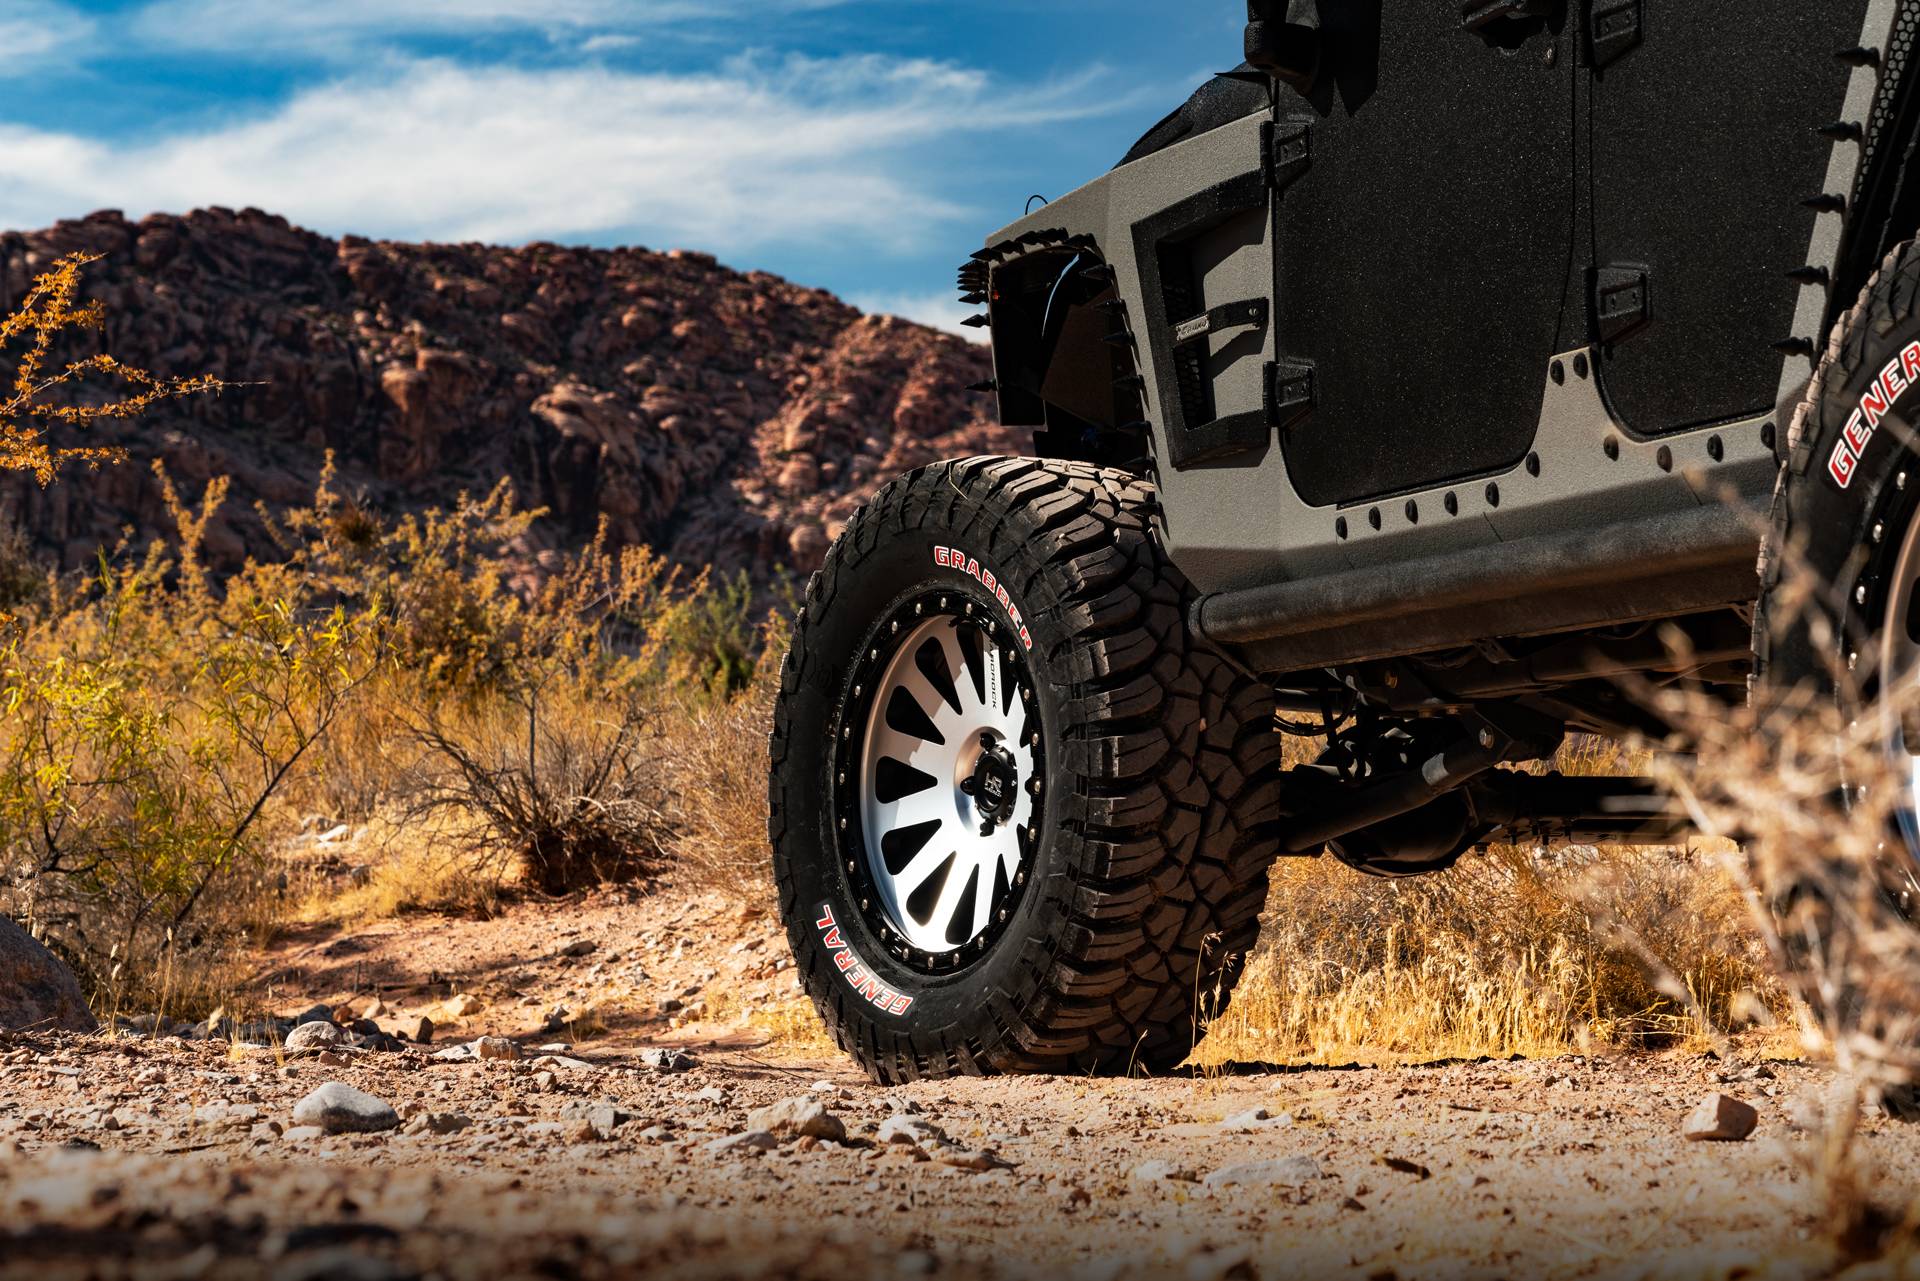 HardRock Offroad Aftermarket Offroad Wheels On a Lifted Jeep